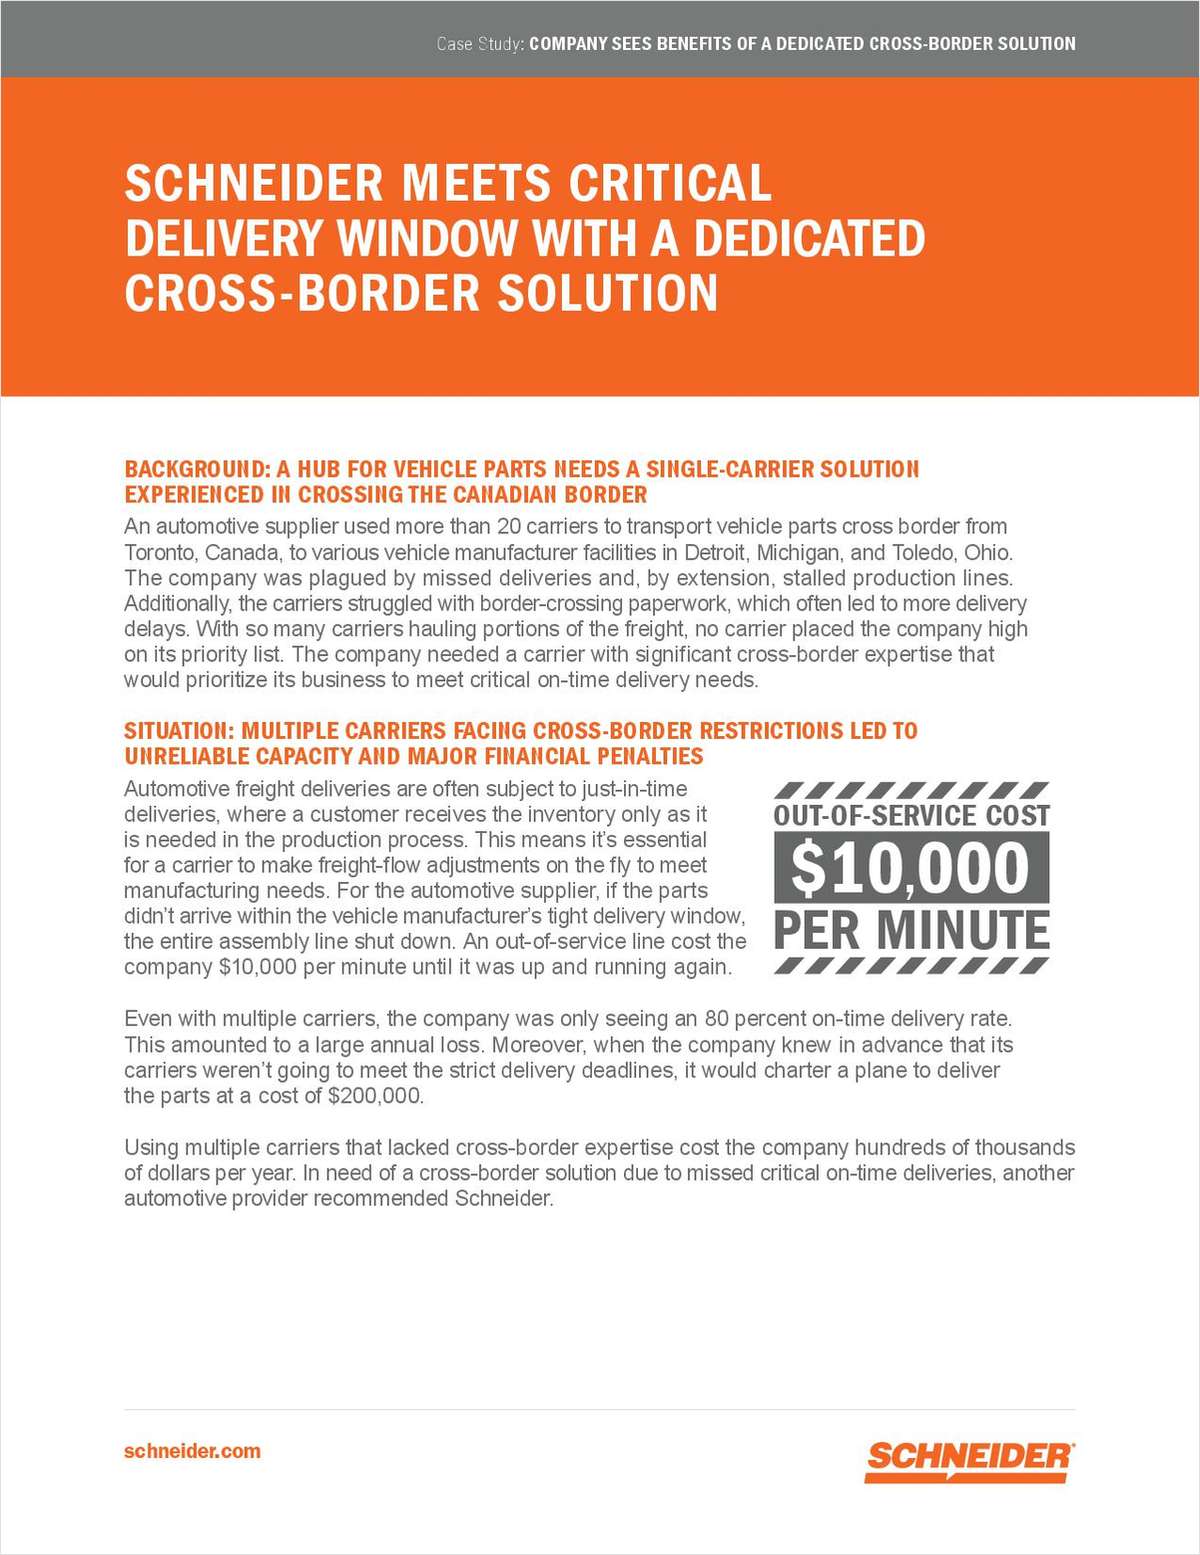 Schneider Works with Automotive Supplier to Save MILLIONS by Flexing to Meet Capacity and Delivery Needs